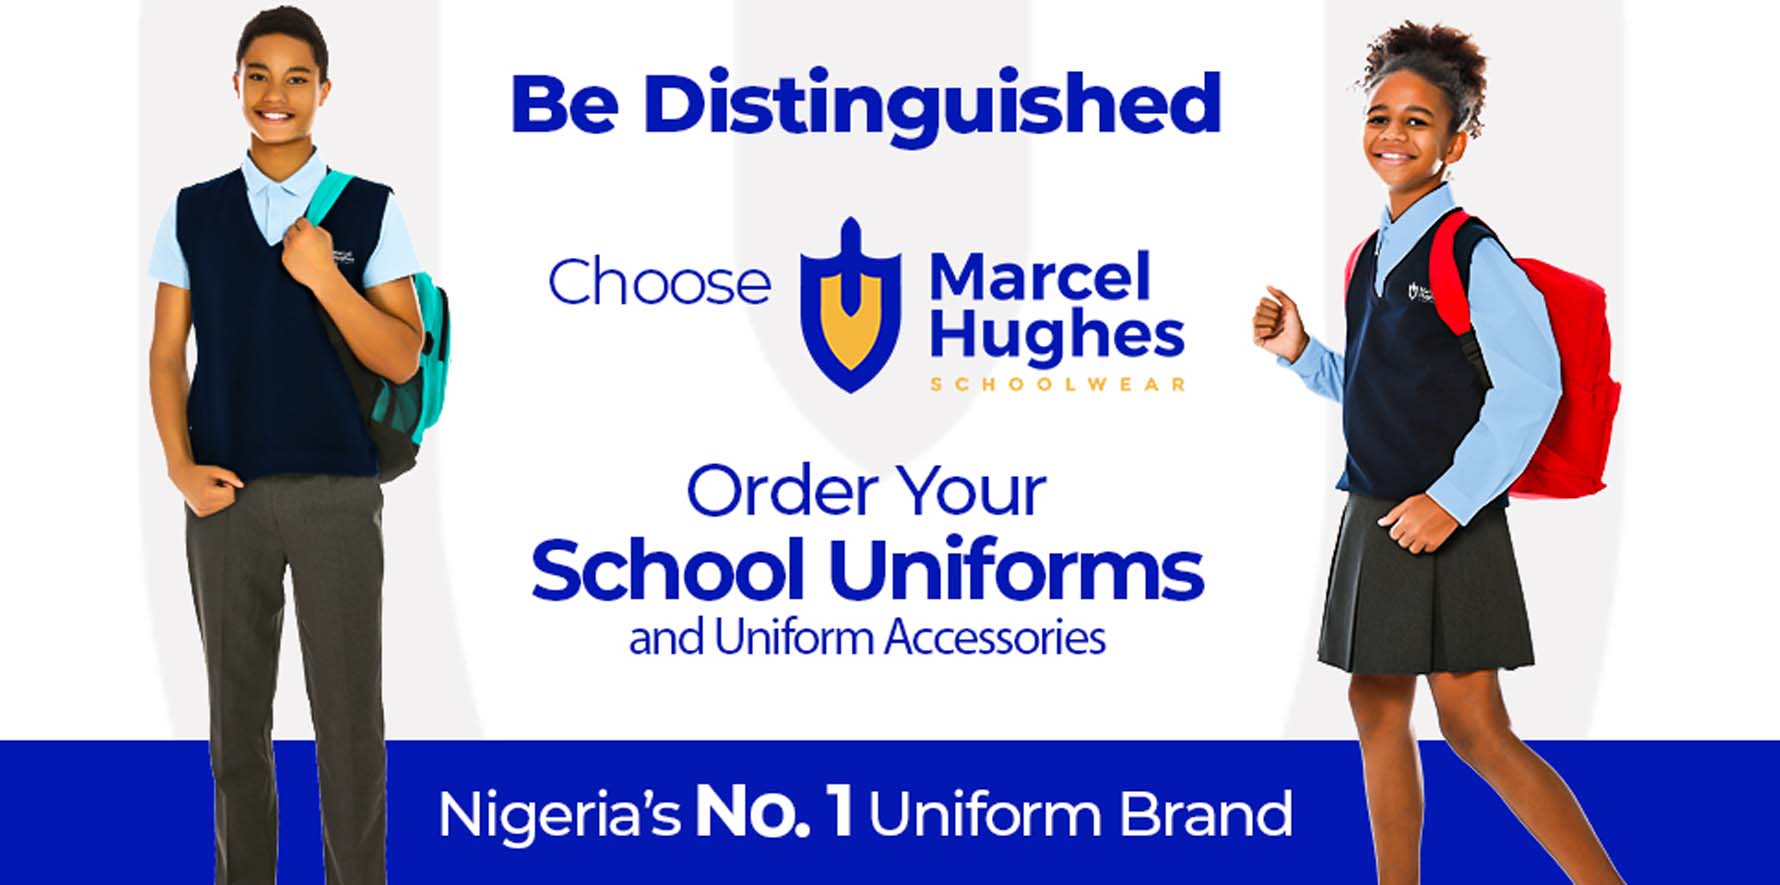 Opaque chin unconditional What to look out for when buying a School Uniforms - Marcel Hughes -  Nigeria's Leading Quality School Uniform Brand